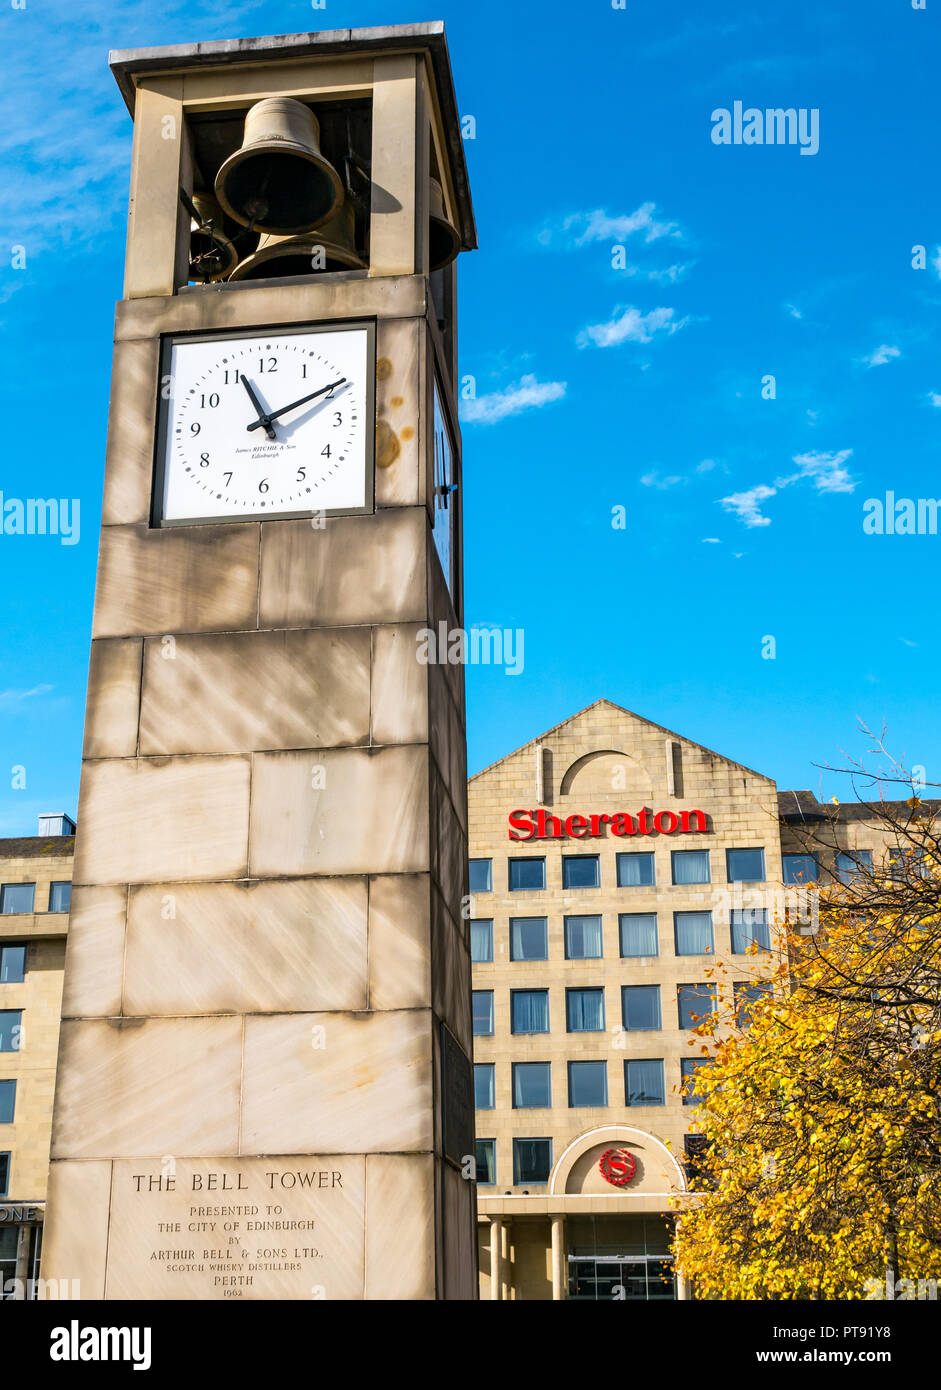 The Bell Tower and clock dated 1962 and Sheraton Hotel, Festival Square, Edinburgh, Scotland, UK with blue sky Stock Photo